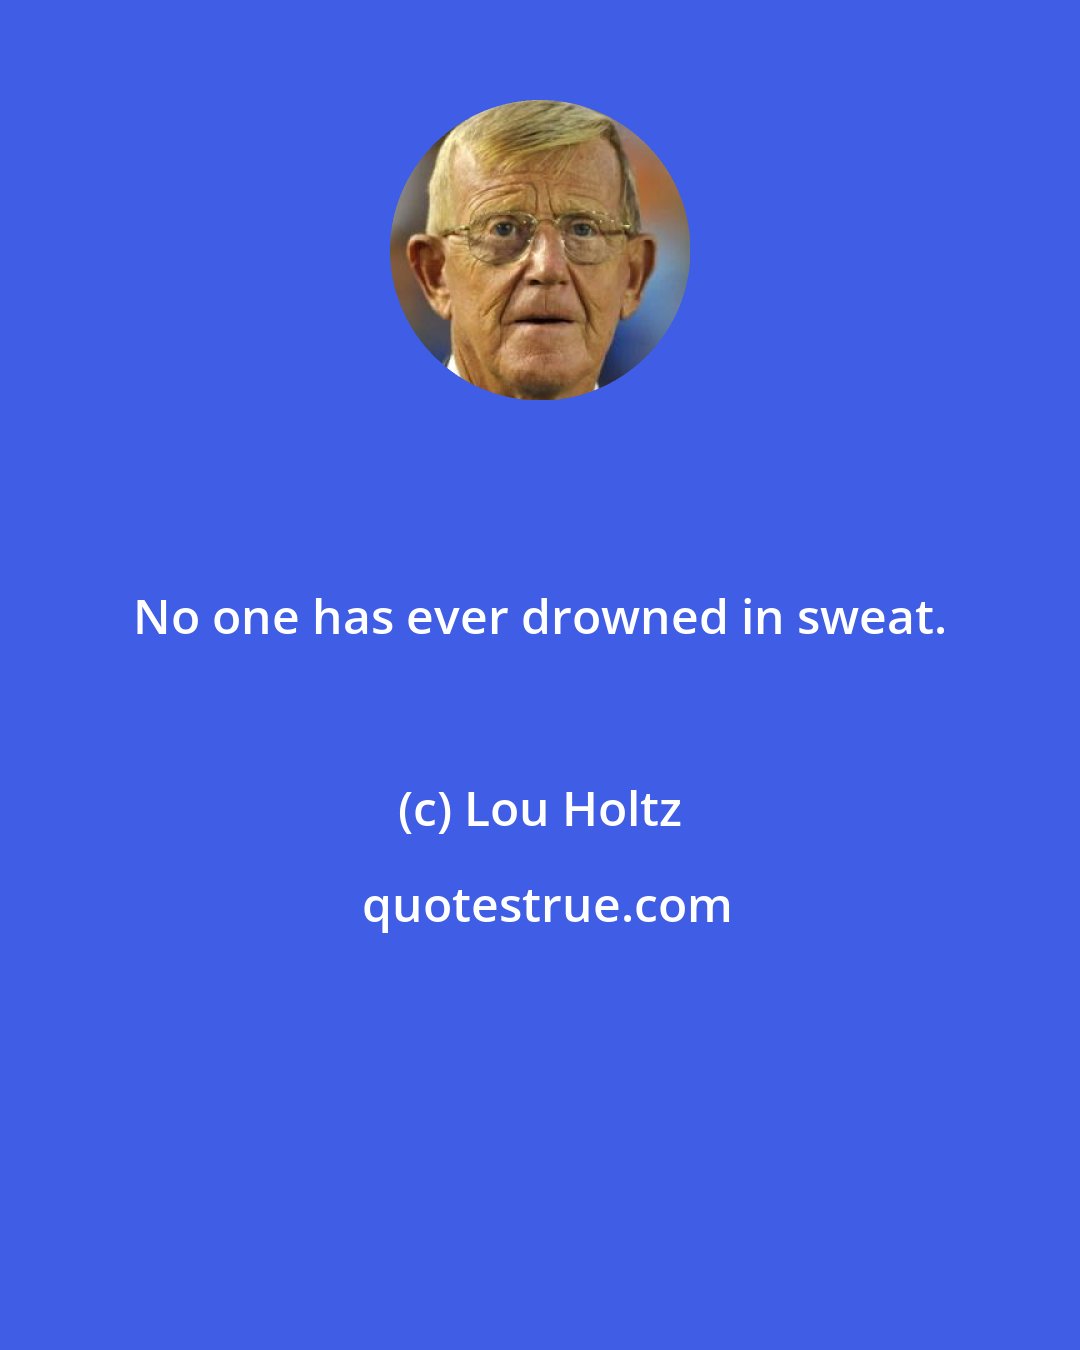 Lou Holtz: No one has ever drowned in sweat.